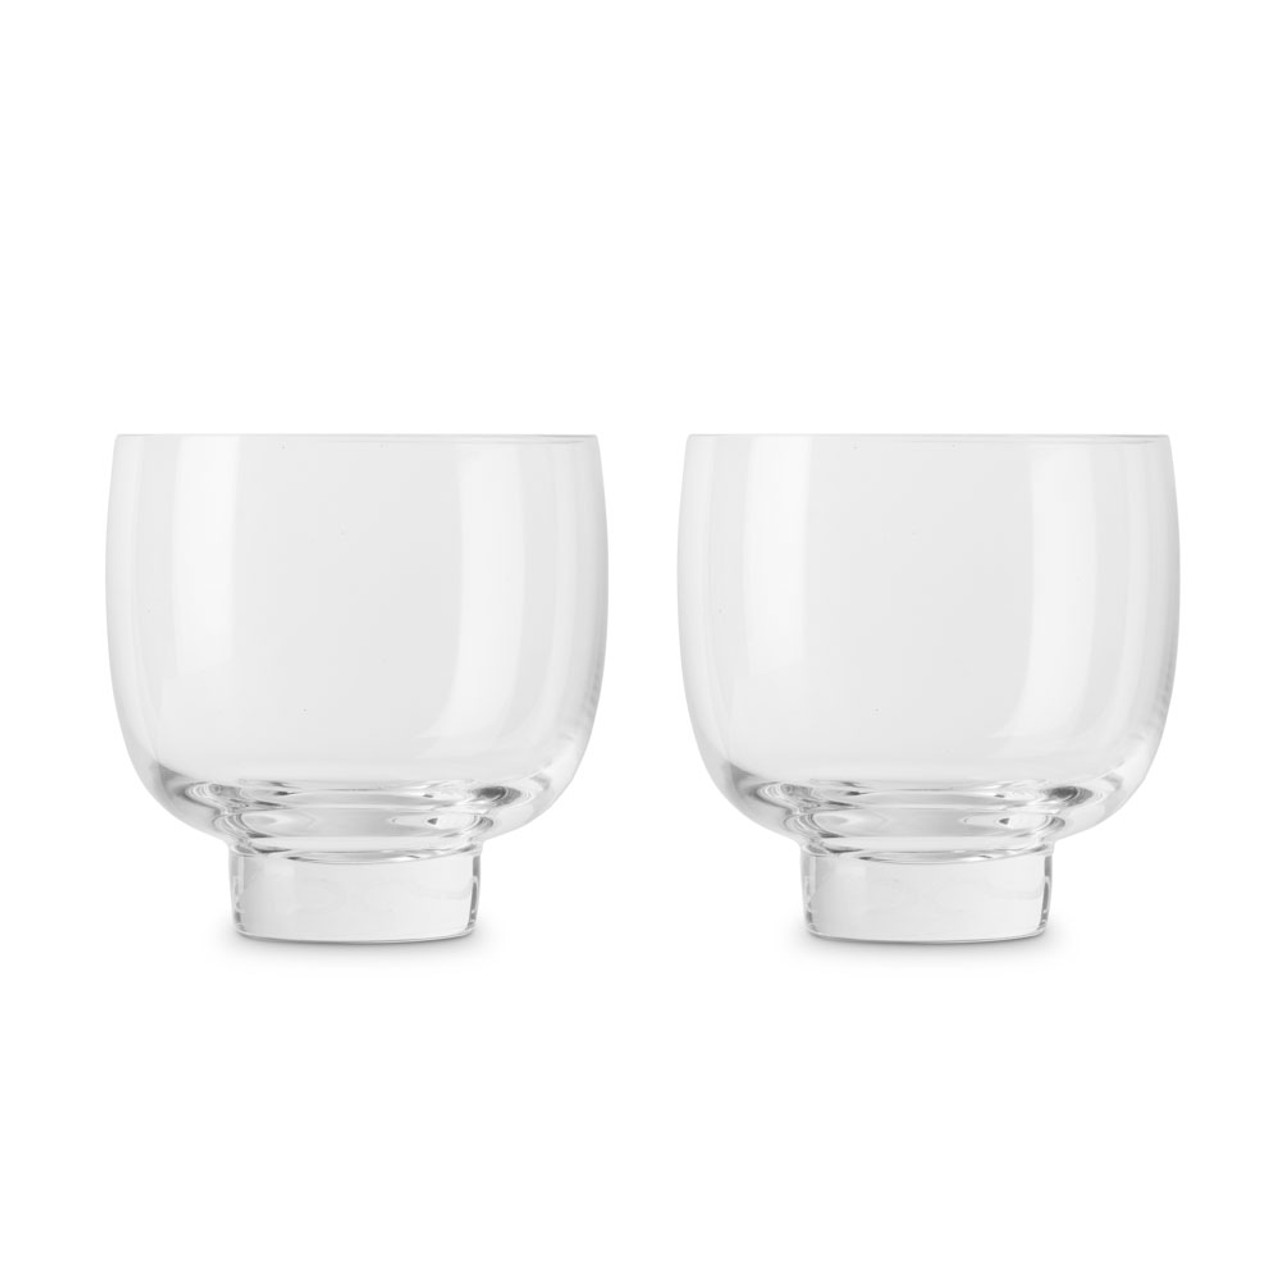 https://cdn11.bigcommerce.com/s-cznxq08r7/images/stencil/1280x1280/products/4955/14611/22303-1076933_Nude_Glass_Malt_Whiskey_Low_Ball_Glasses_-_8.79_oz_-_Set_of_2_0002__24814.1657134929.jpg?c=1